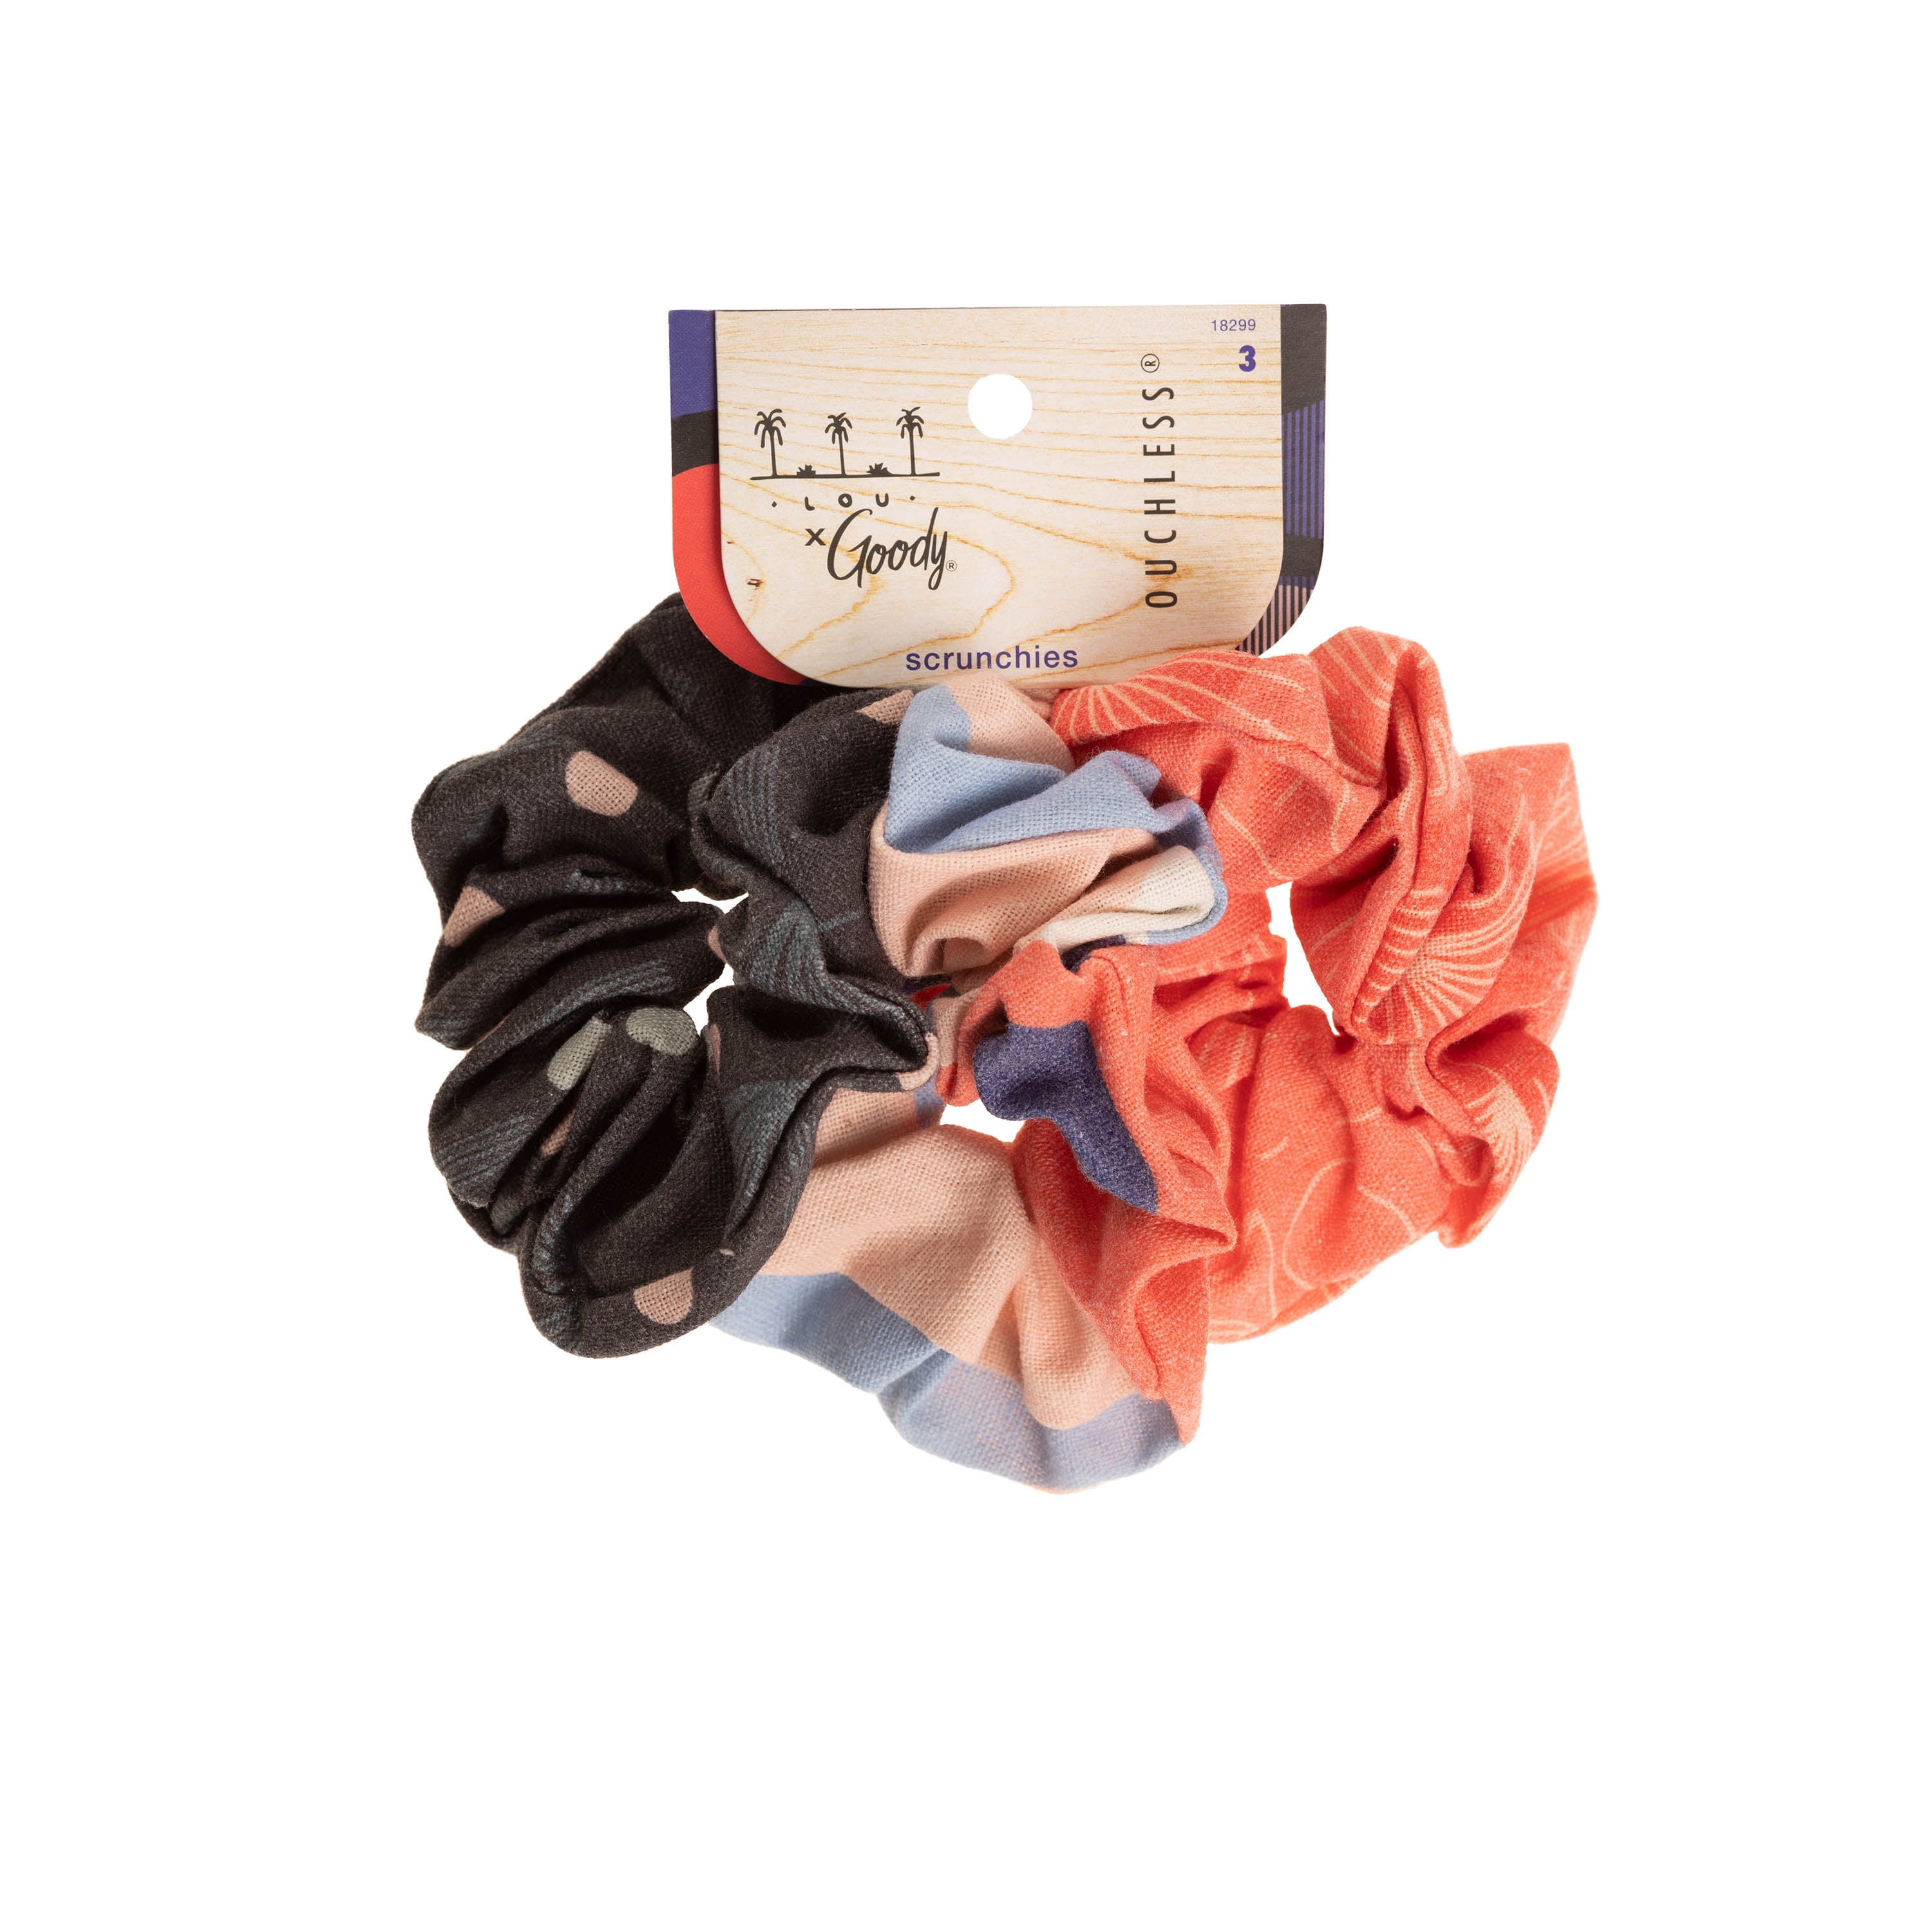 Goody Tru X Hola Lou Collab Ouchless Standard Size Printed Scrunchies, 3 CT